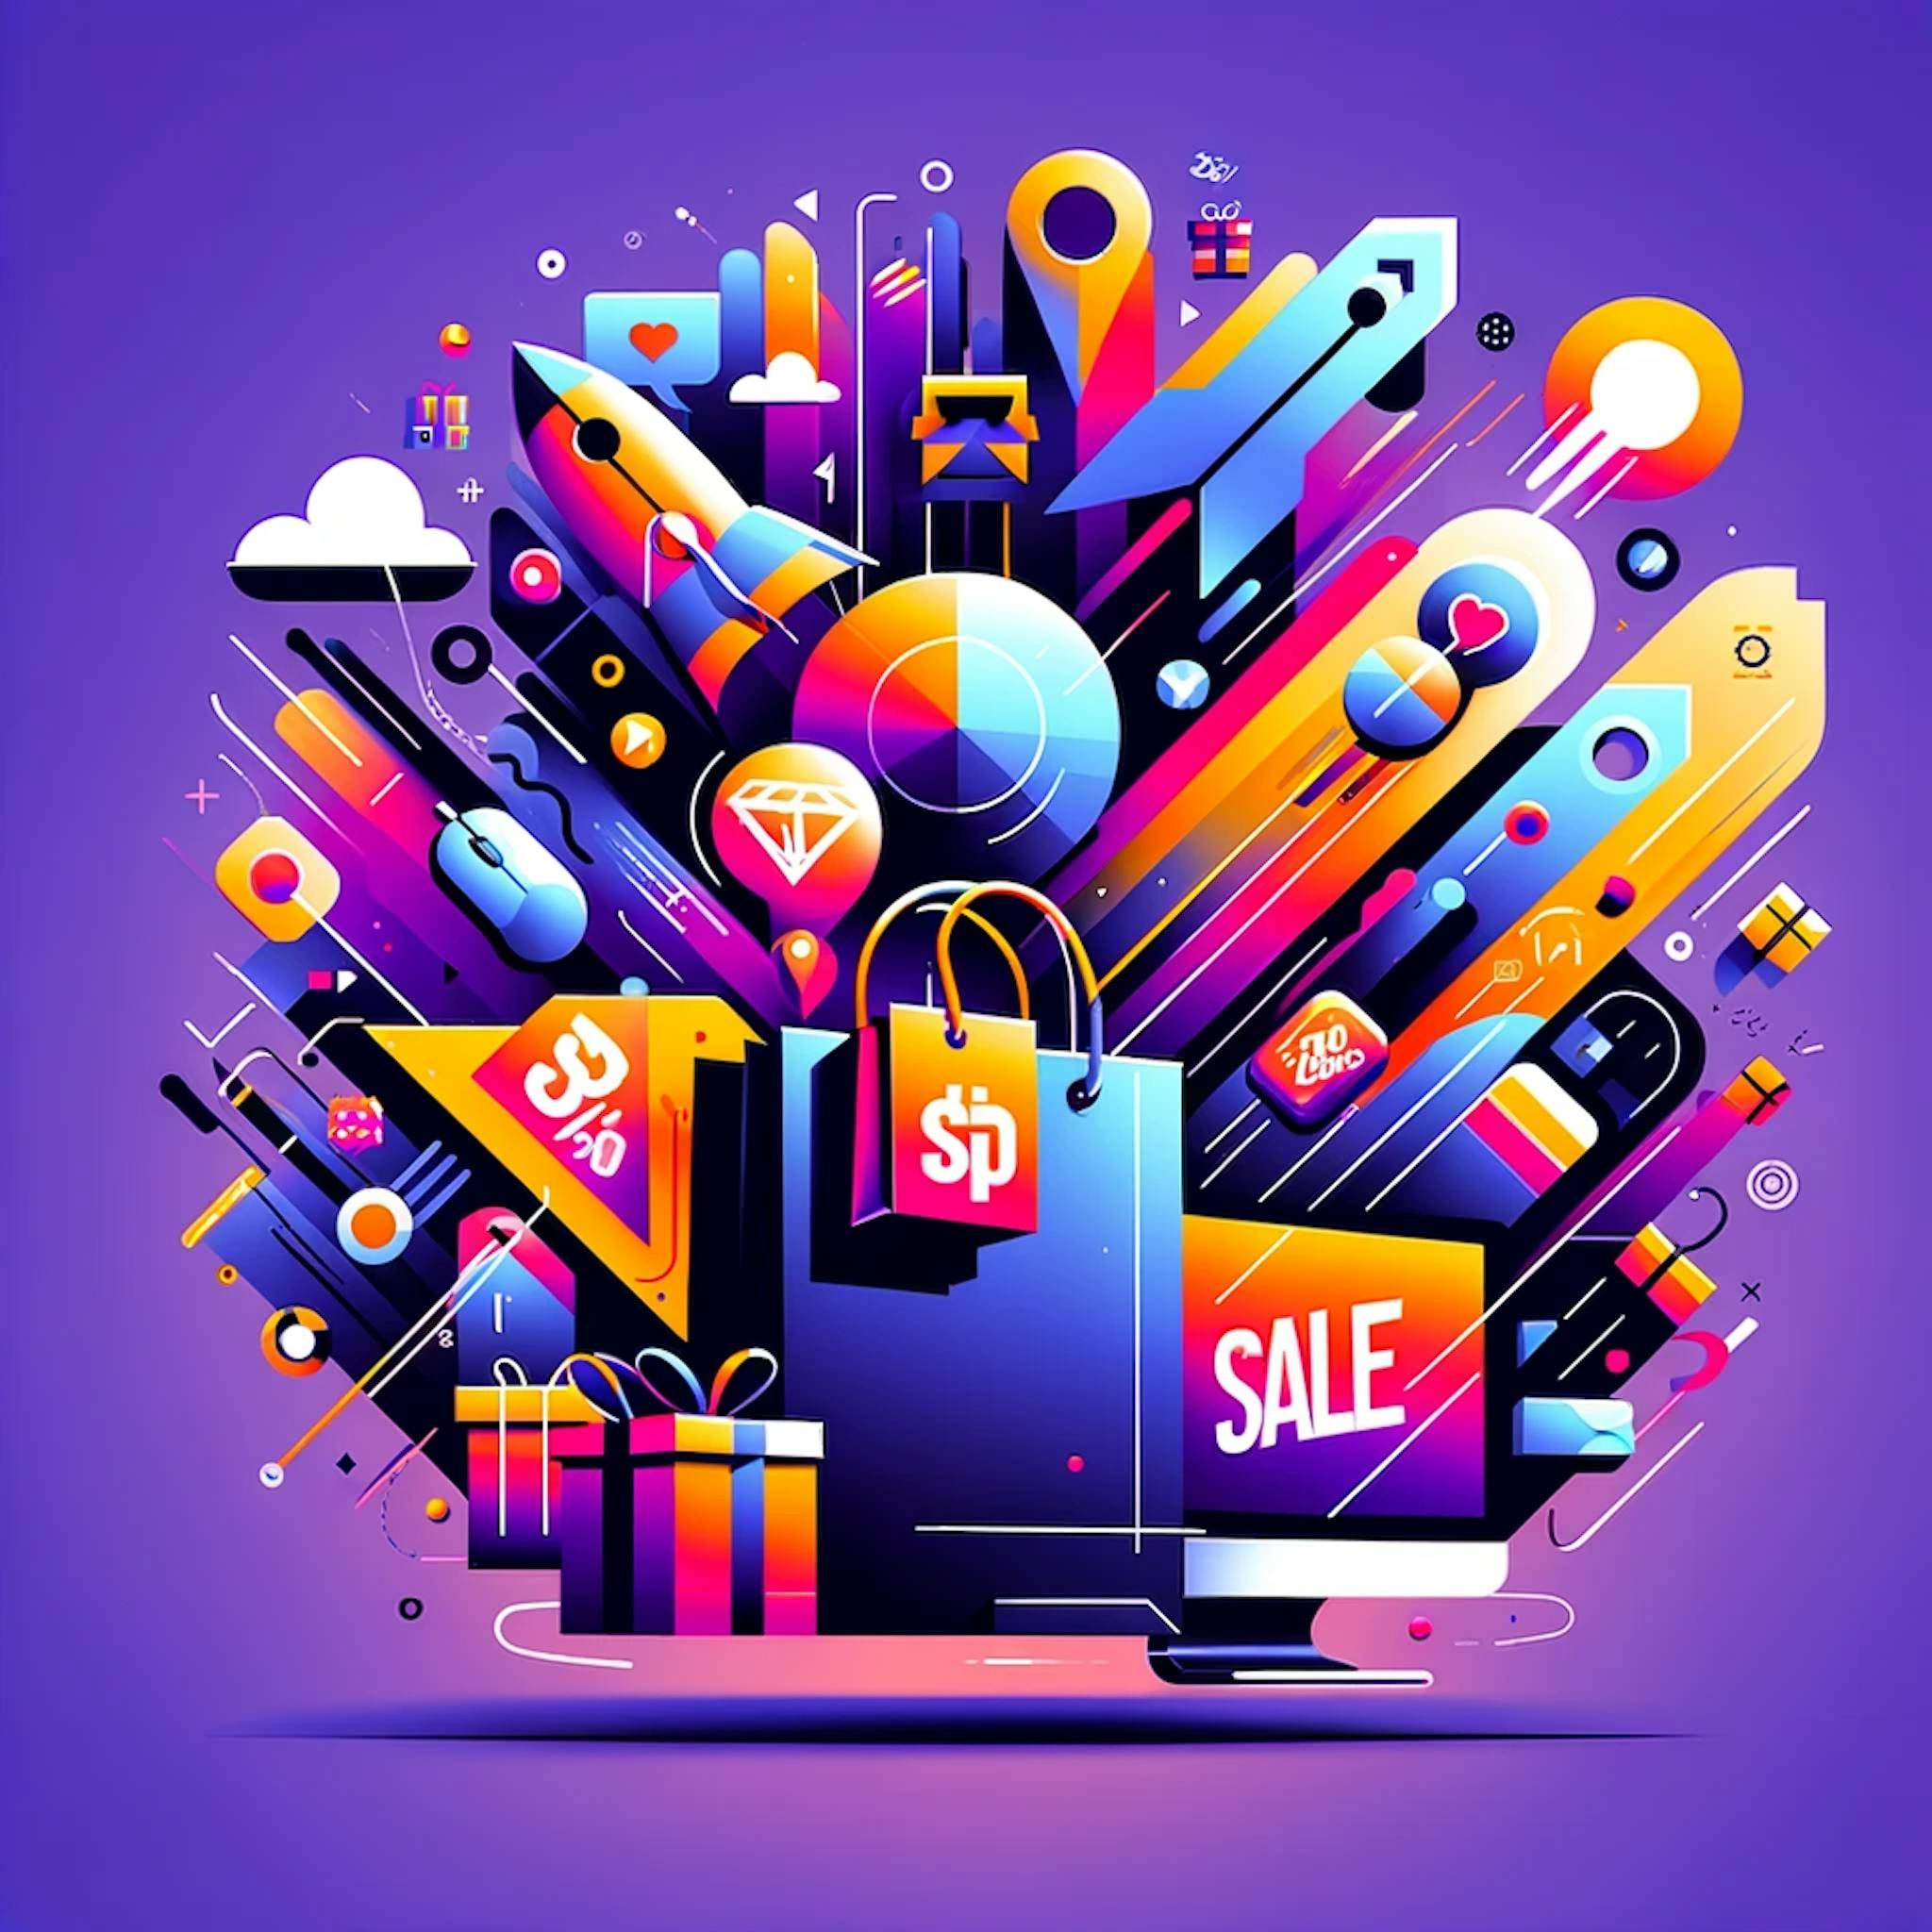 icons like a vibrant shopping bag, a bright sale tag, an enthusiastic crowd, and digital elements for online shopping